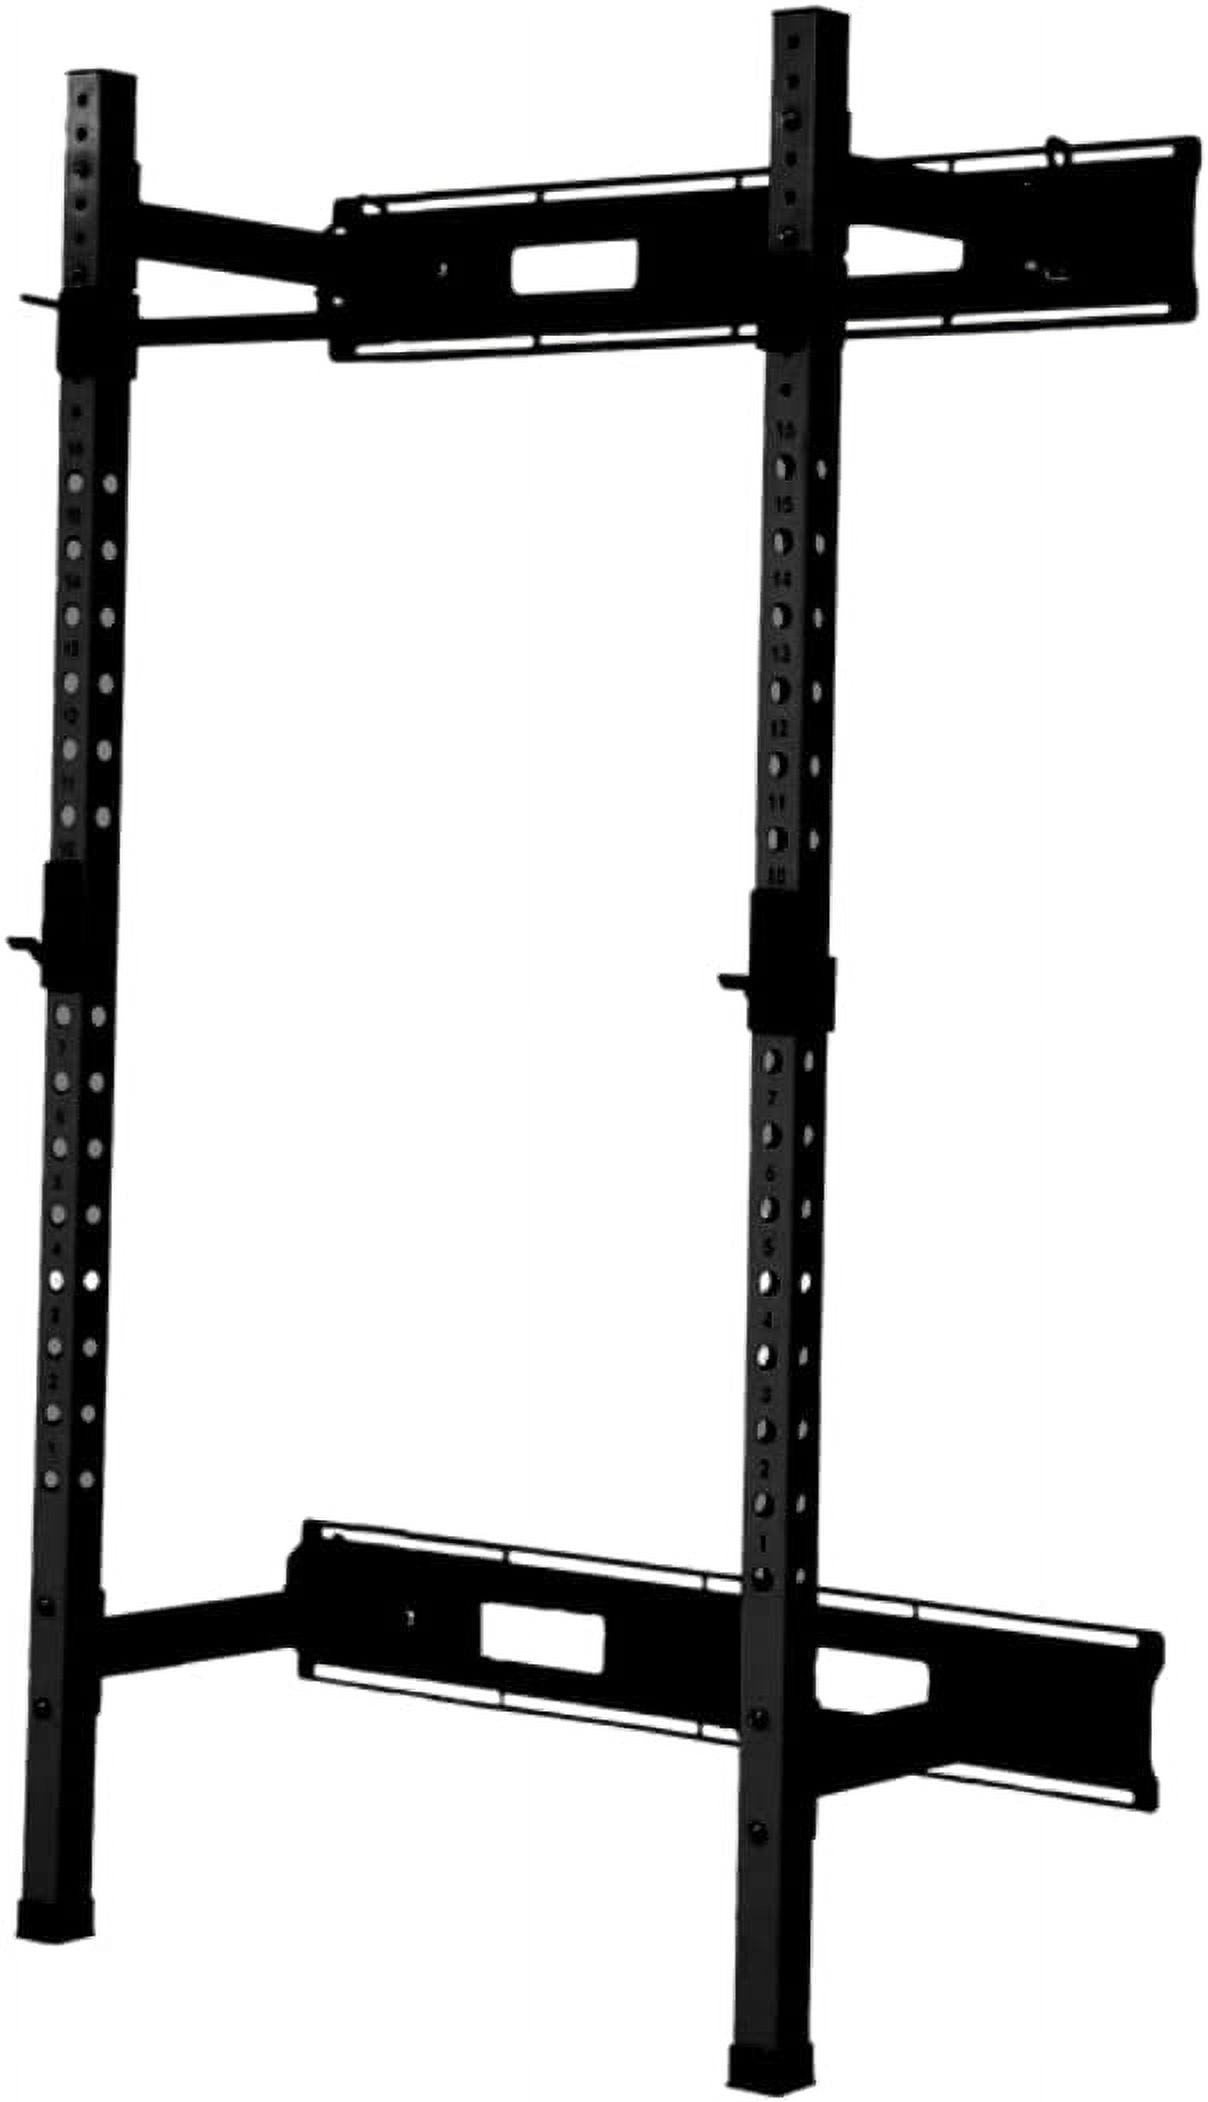 HulkFit Pro Series 2.35” x 2.35” Steel Folding Wall Mounted Power Rack Cage  with Attachment Accessories - J Hooks and Height Adjustable Pull Up Bar 